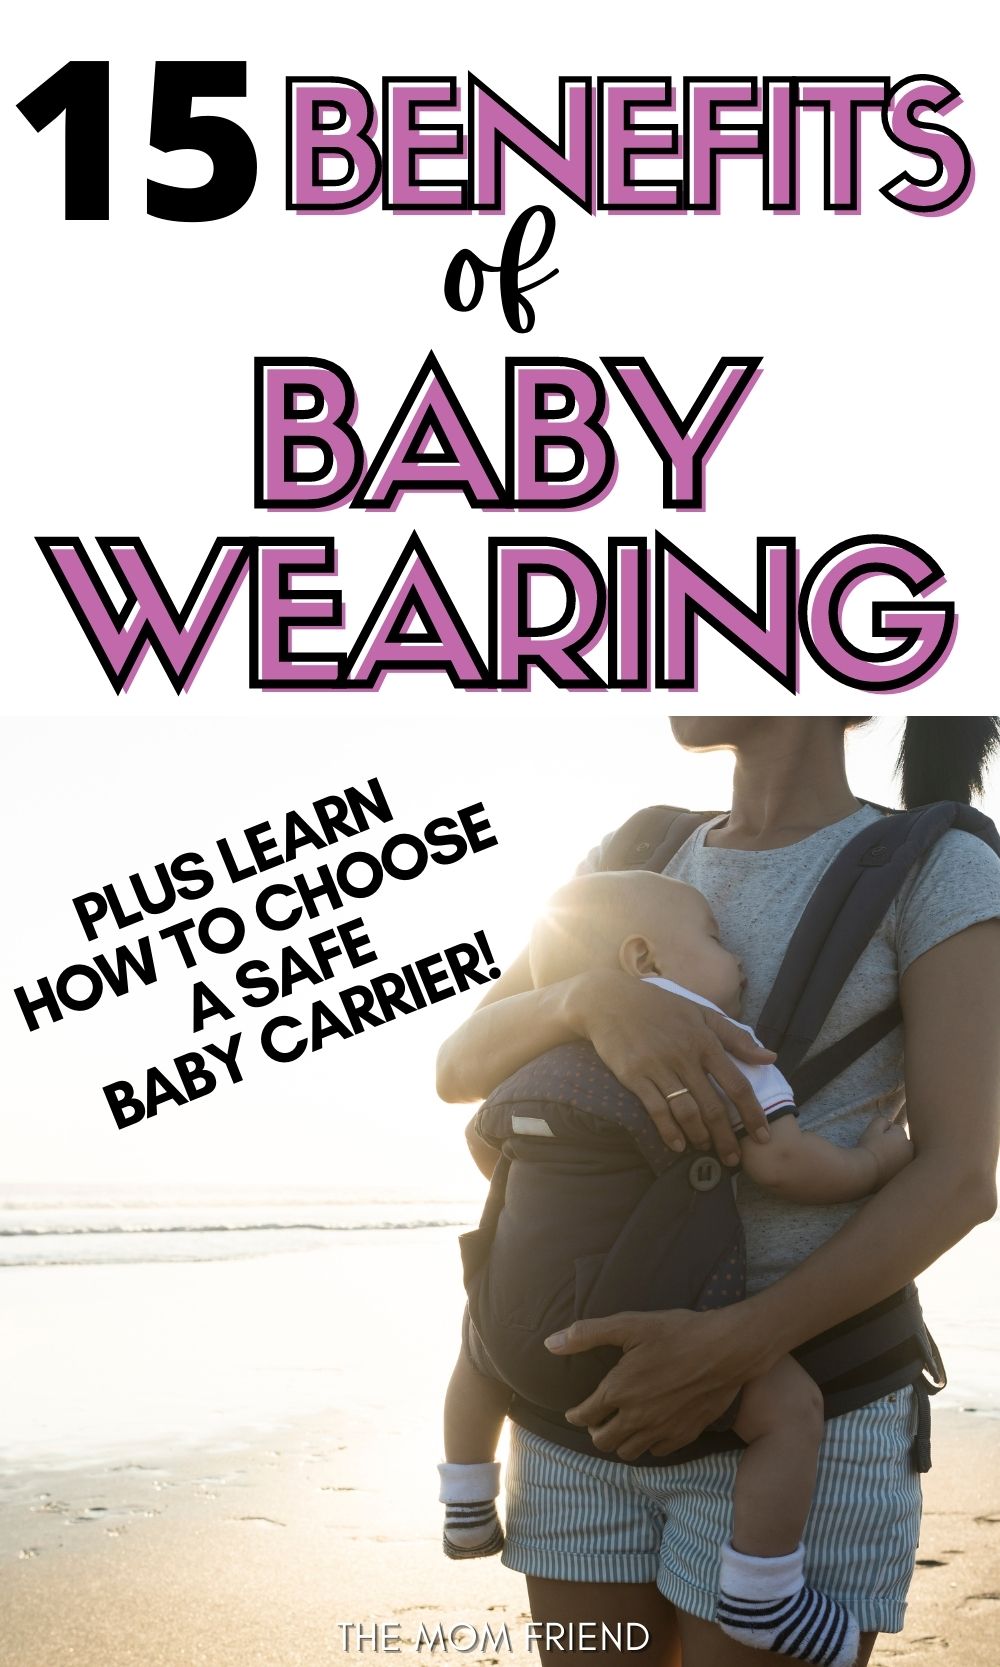 Pinterest image with text: 15 benefits of baby wearing, plus learn how to choose a safe baby carrier